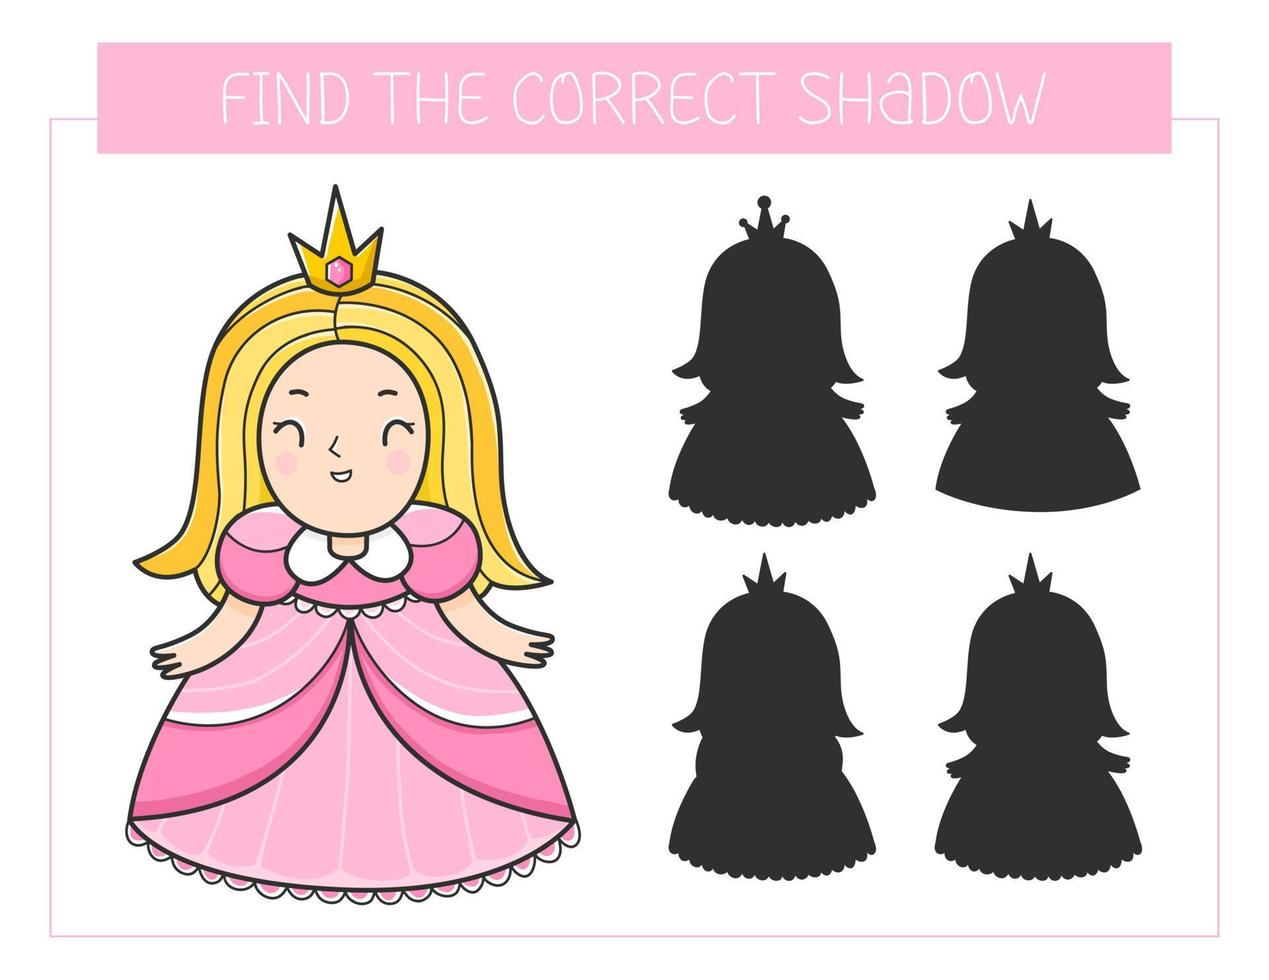 Find the correct shadow game with a princess. Educational game for children. Cute cartoon princess. Shadow matching game. Vector illustration.